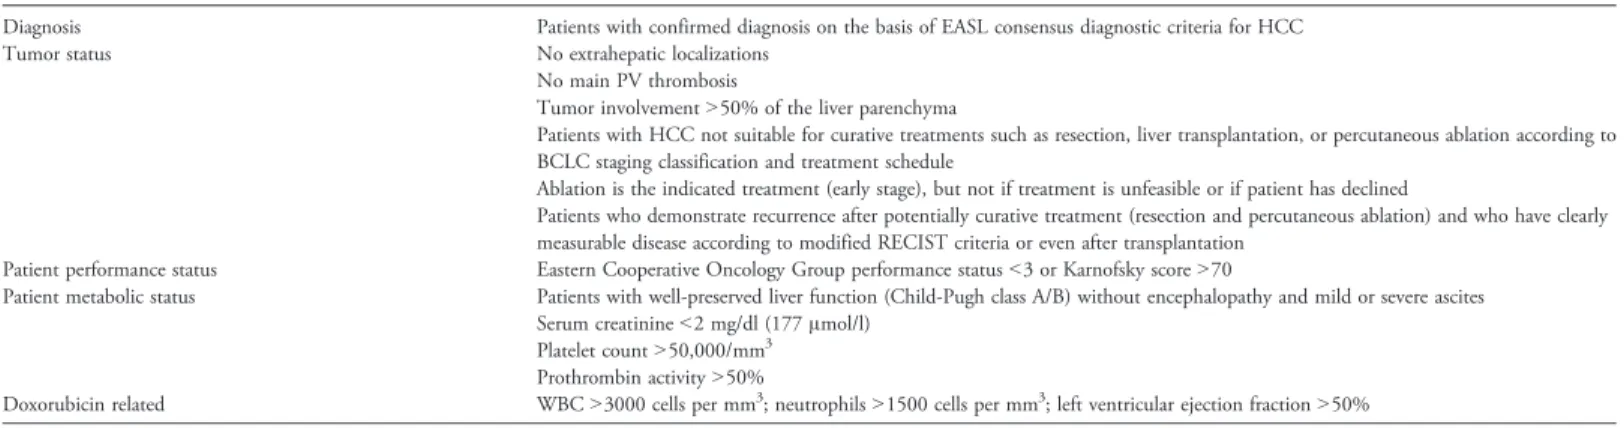 Table 1. Indications for TACE in HCC Patients